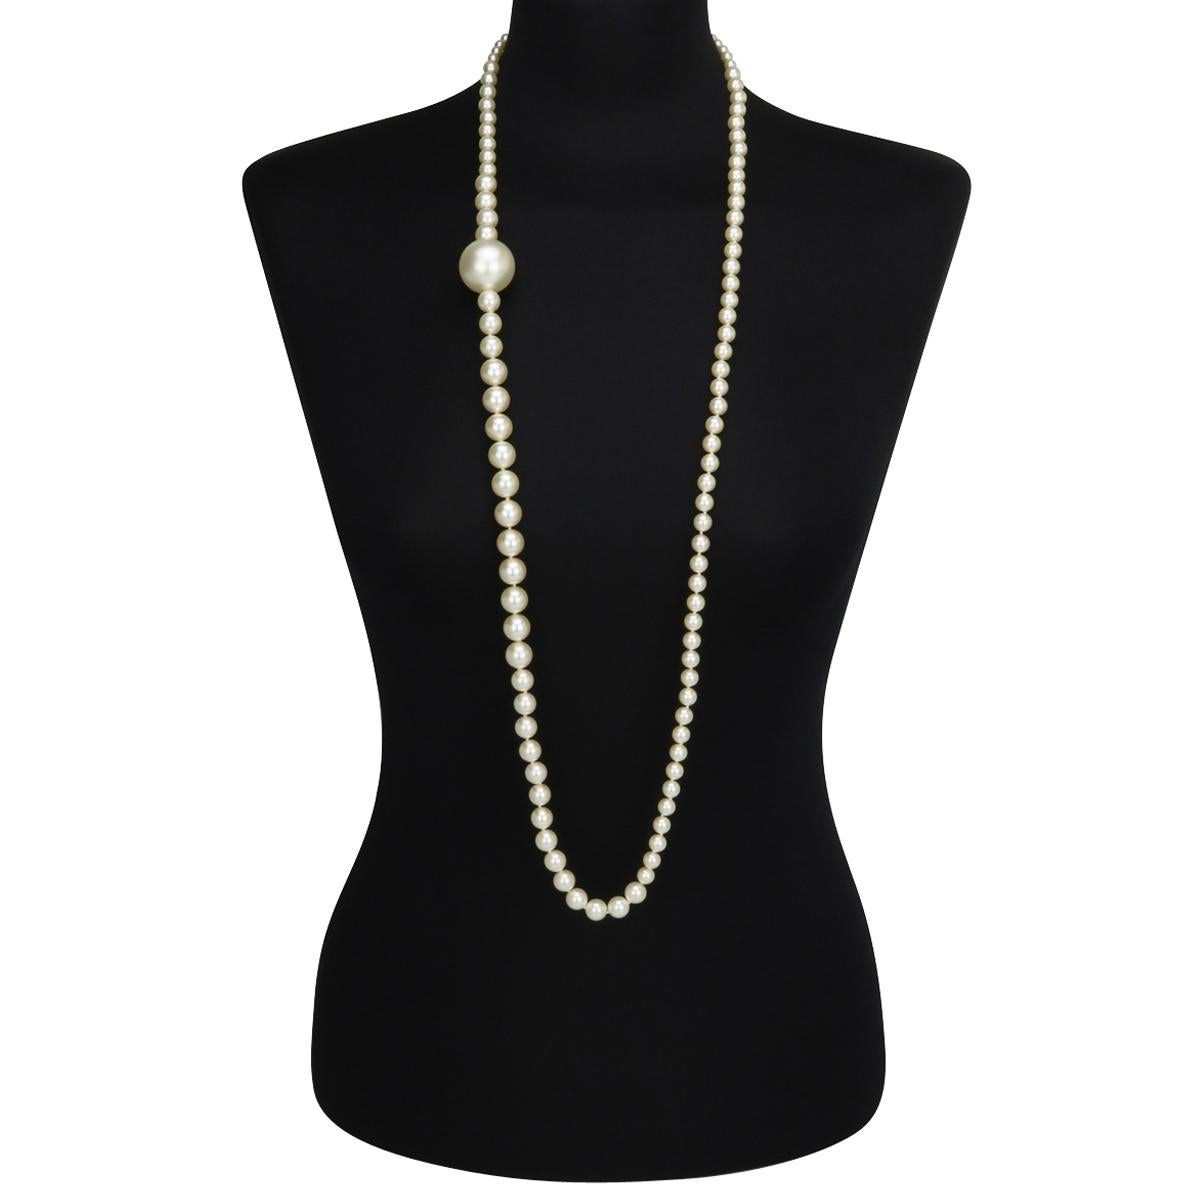 Authentic CHANEL CC Faux Pearl Gold Long Necklace 2016 (B16 V).

This stunning long necklace is in excellent condition.

It is made of exquisite various-sized baroque pearl beads, with two giant pearl pendants, one of which has a large gold CC logo